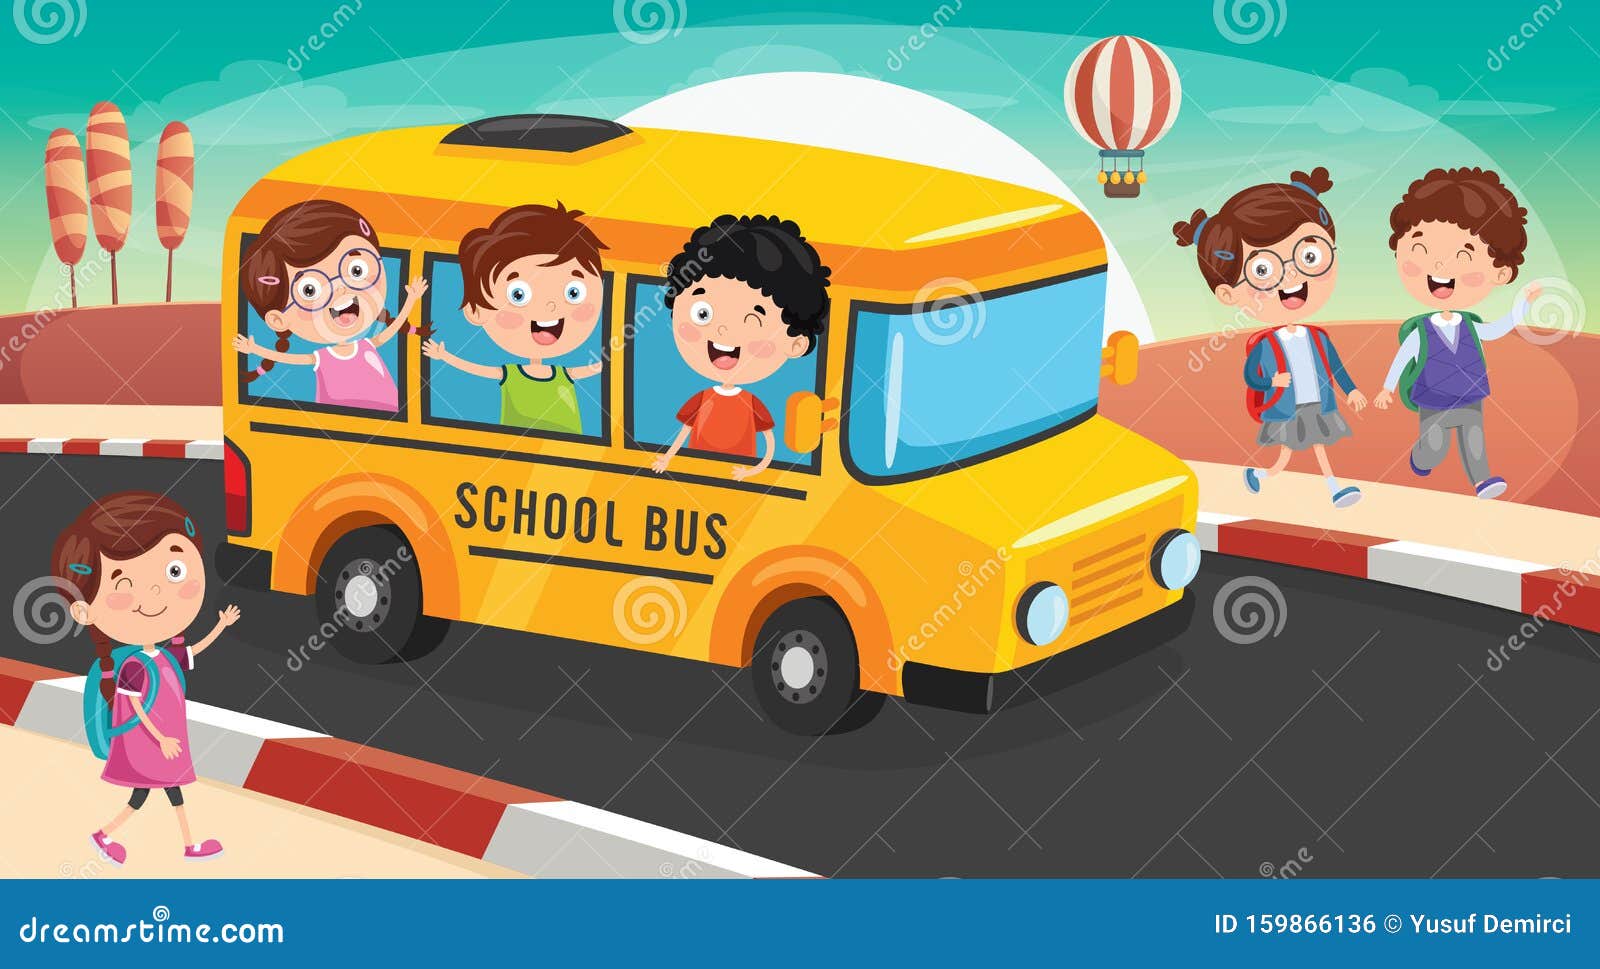 School Children are Going To School by Bus Stock Vector - Illustration of  graduation, jumping: 159866136